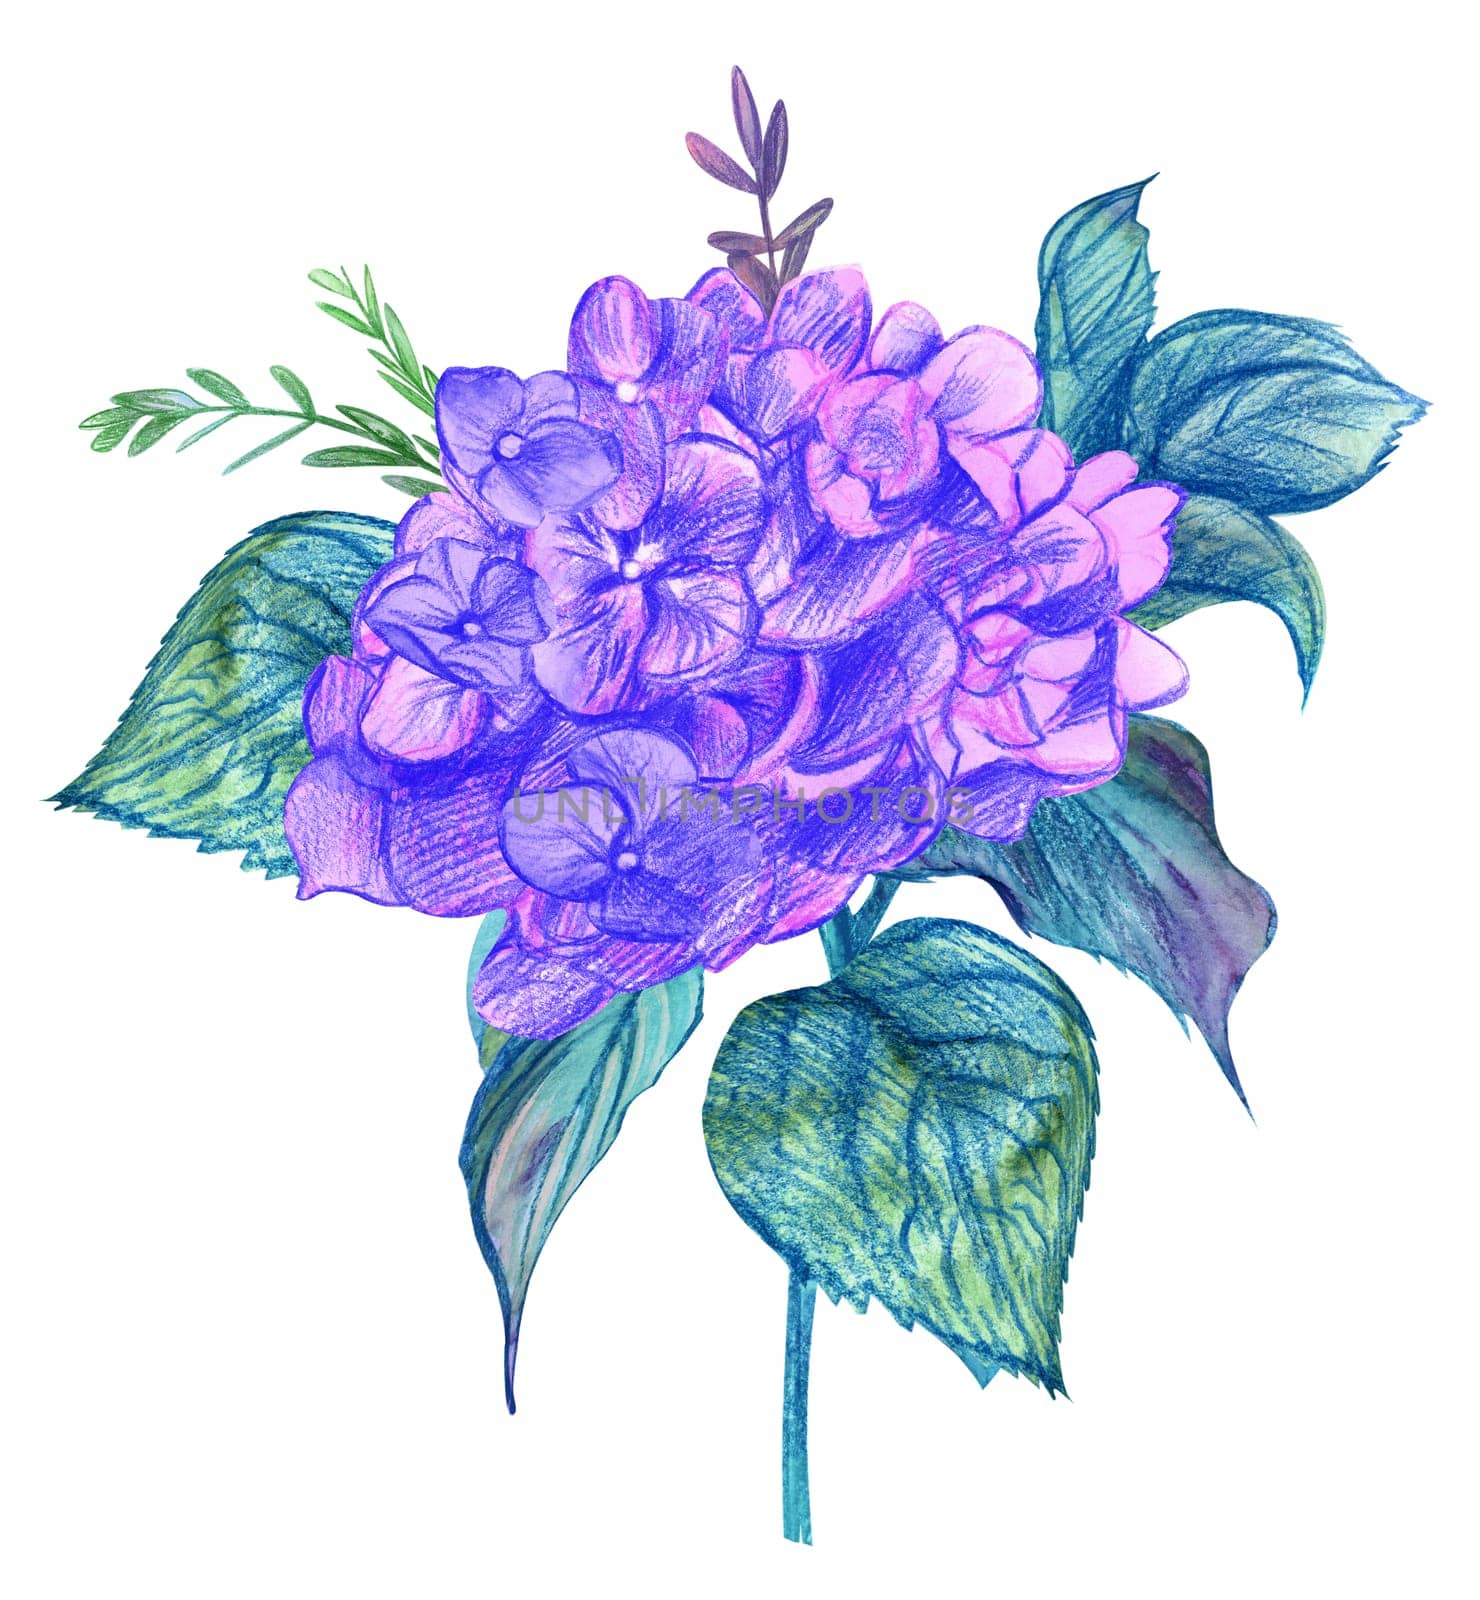 Hydrangea flower in purple hues painted in watercolor for postcards and print design isolated on white background